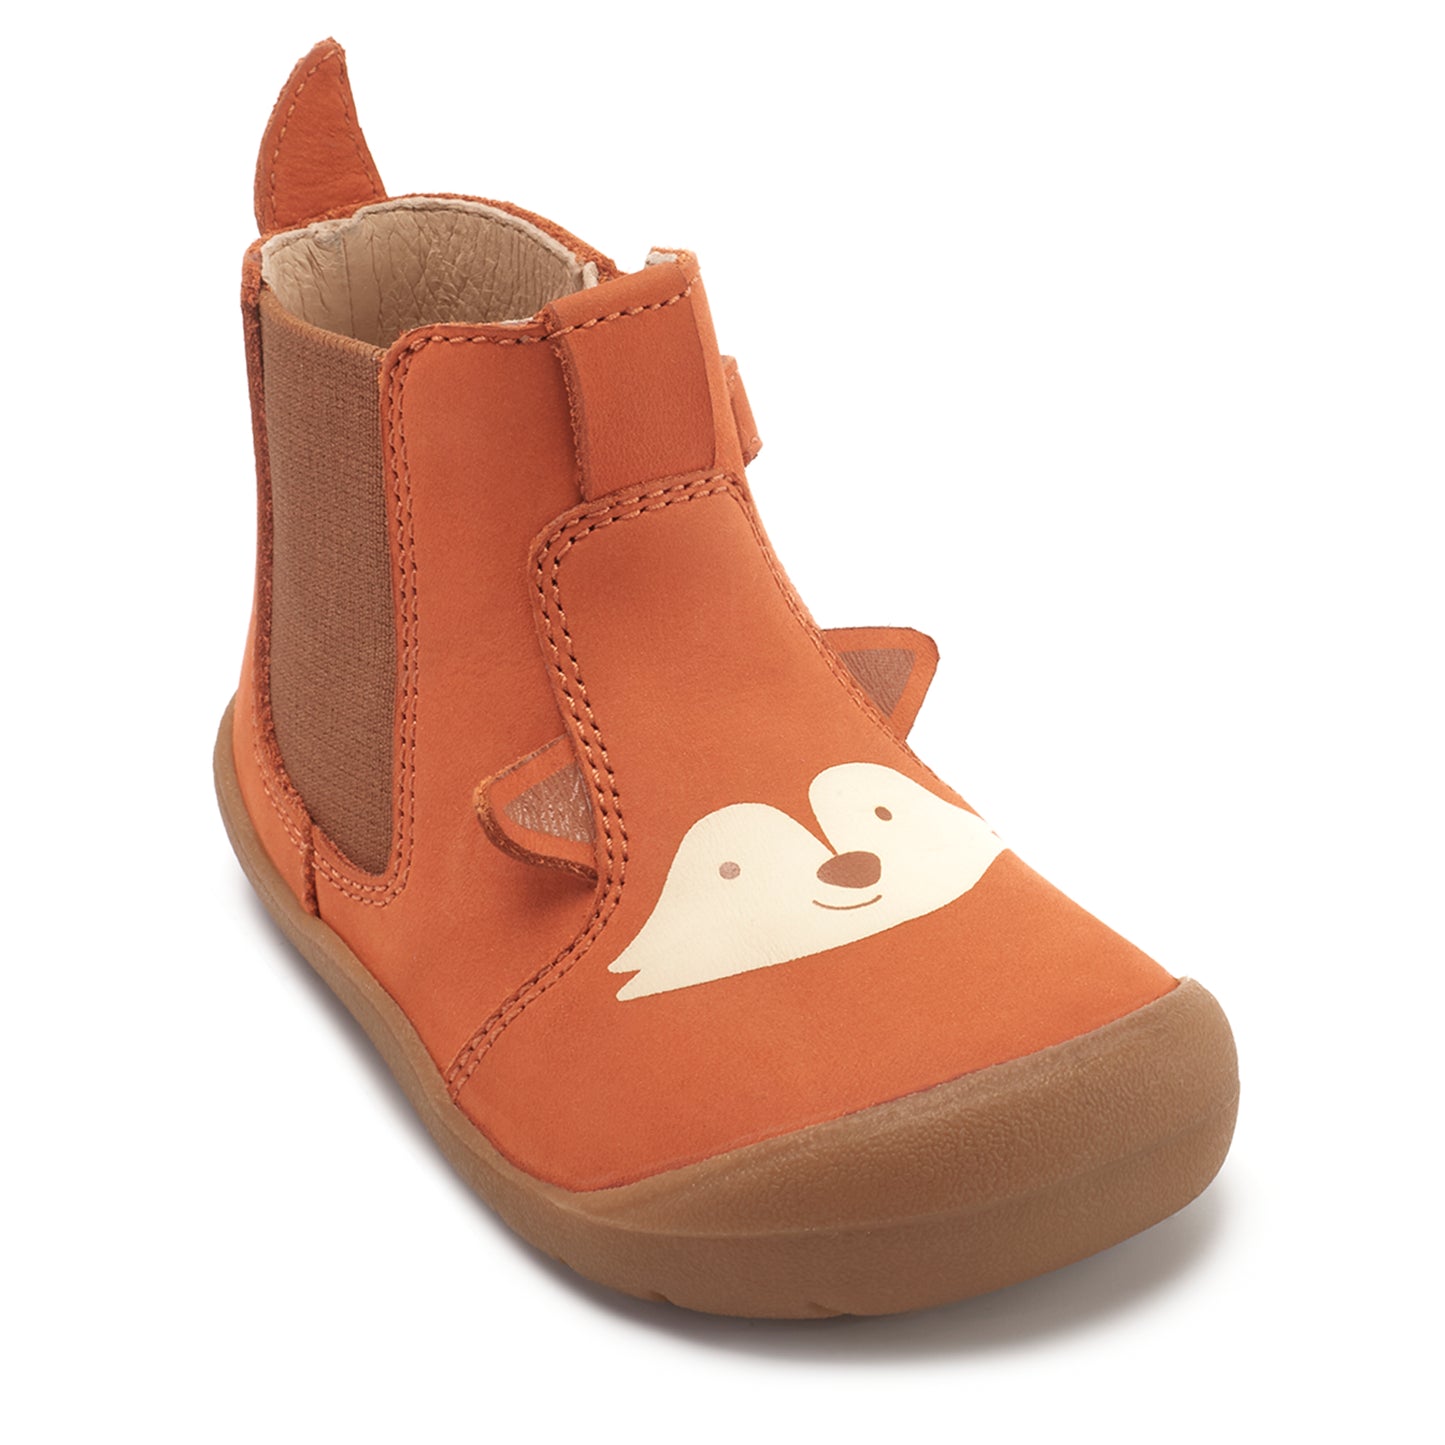 A unisex ankle boot by Start Rite and JoJo Maman Bebe, style Friend,in Rust nubuck and fox face, with zip fastening. Angled view.